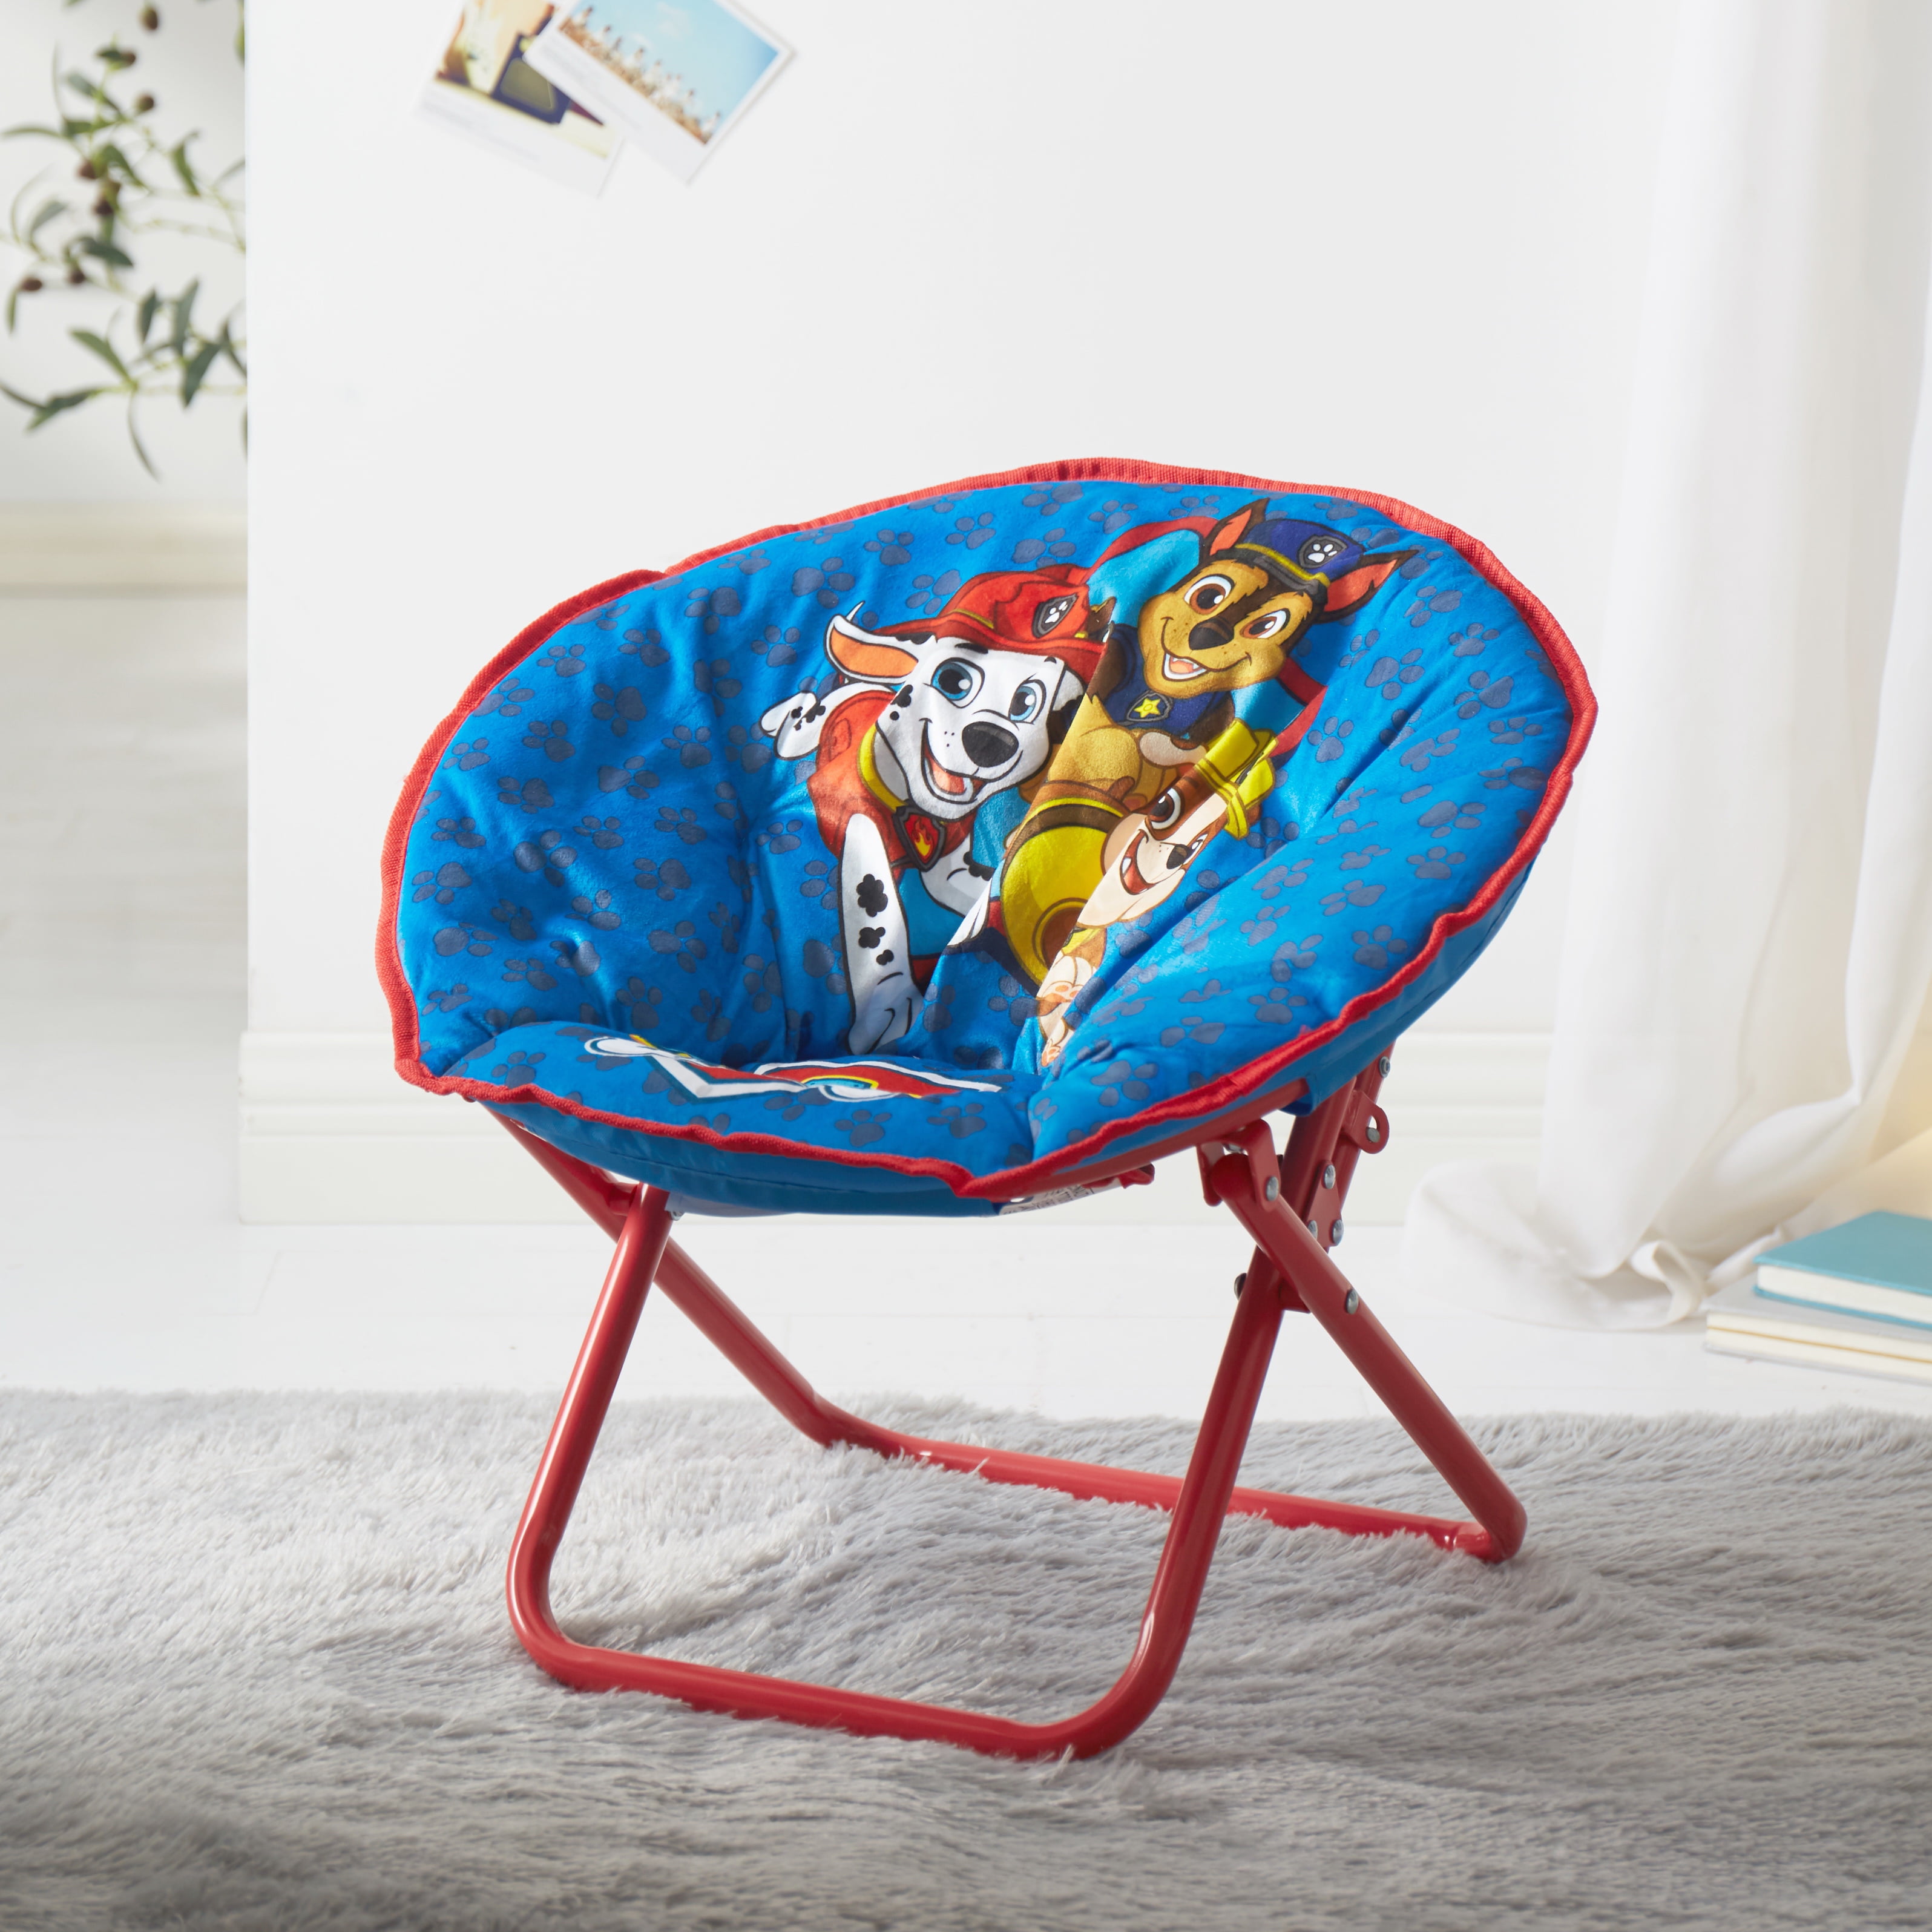 Paw patrol Blue Kids Garden Chair Comfortable With A Safety Lock and Suitable For Both Indoors and Outdoors/Children Garden Decor/Children Flashy Chair With Cartoon Character Designs 